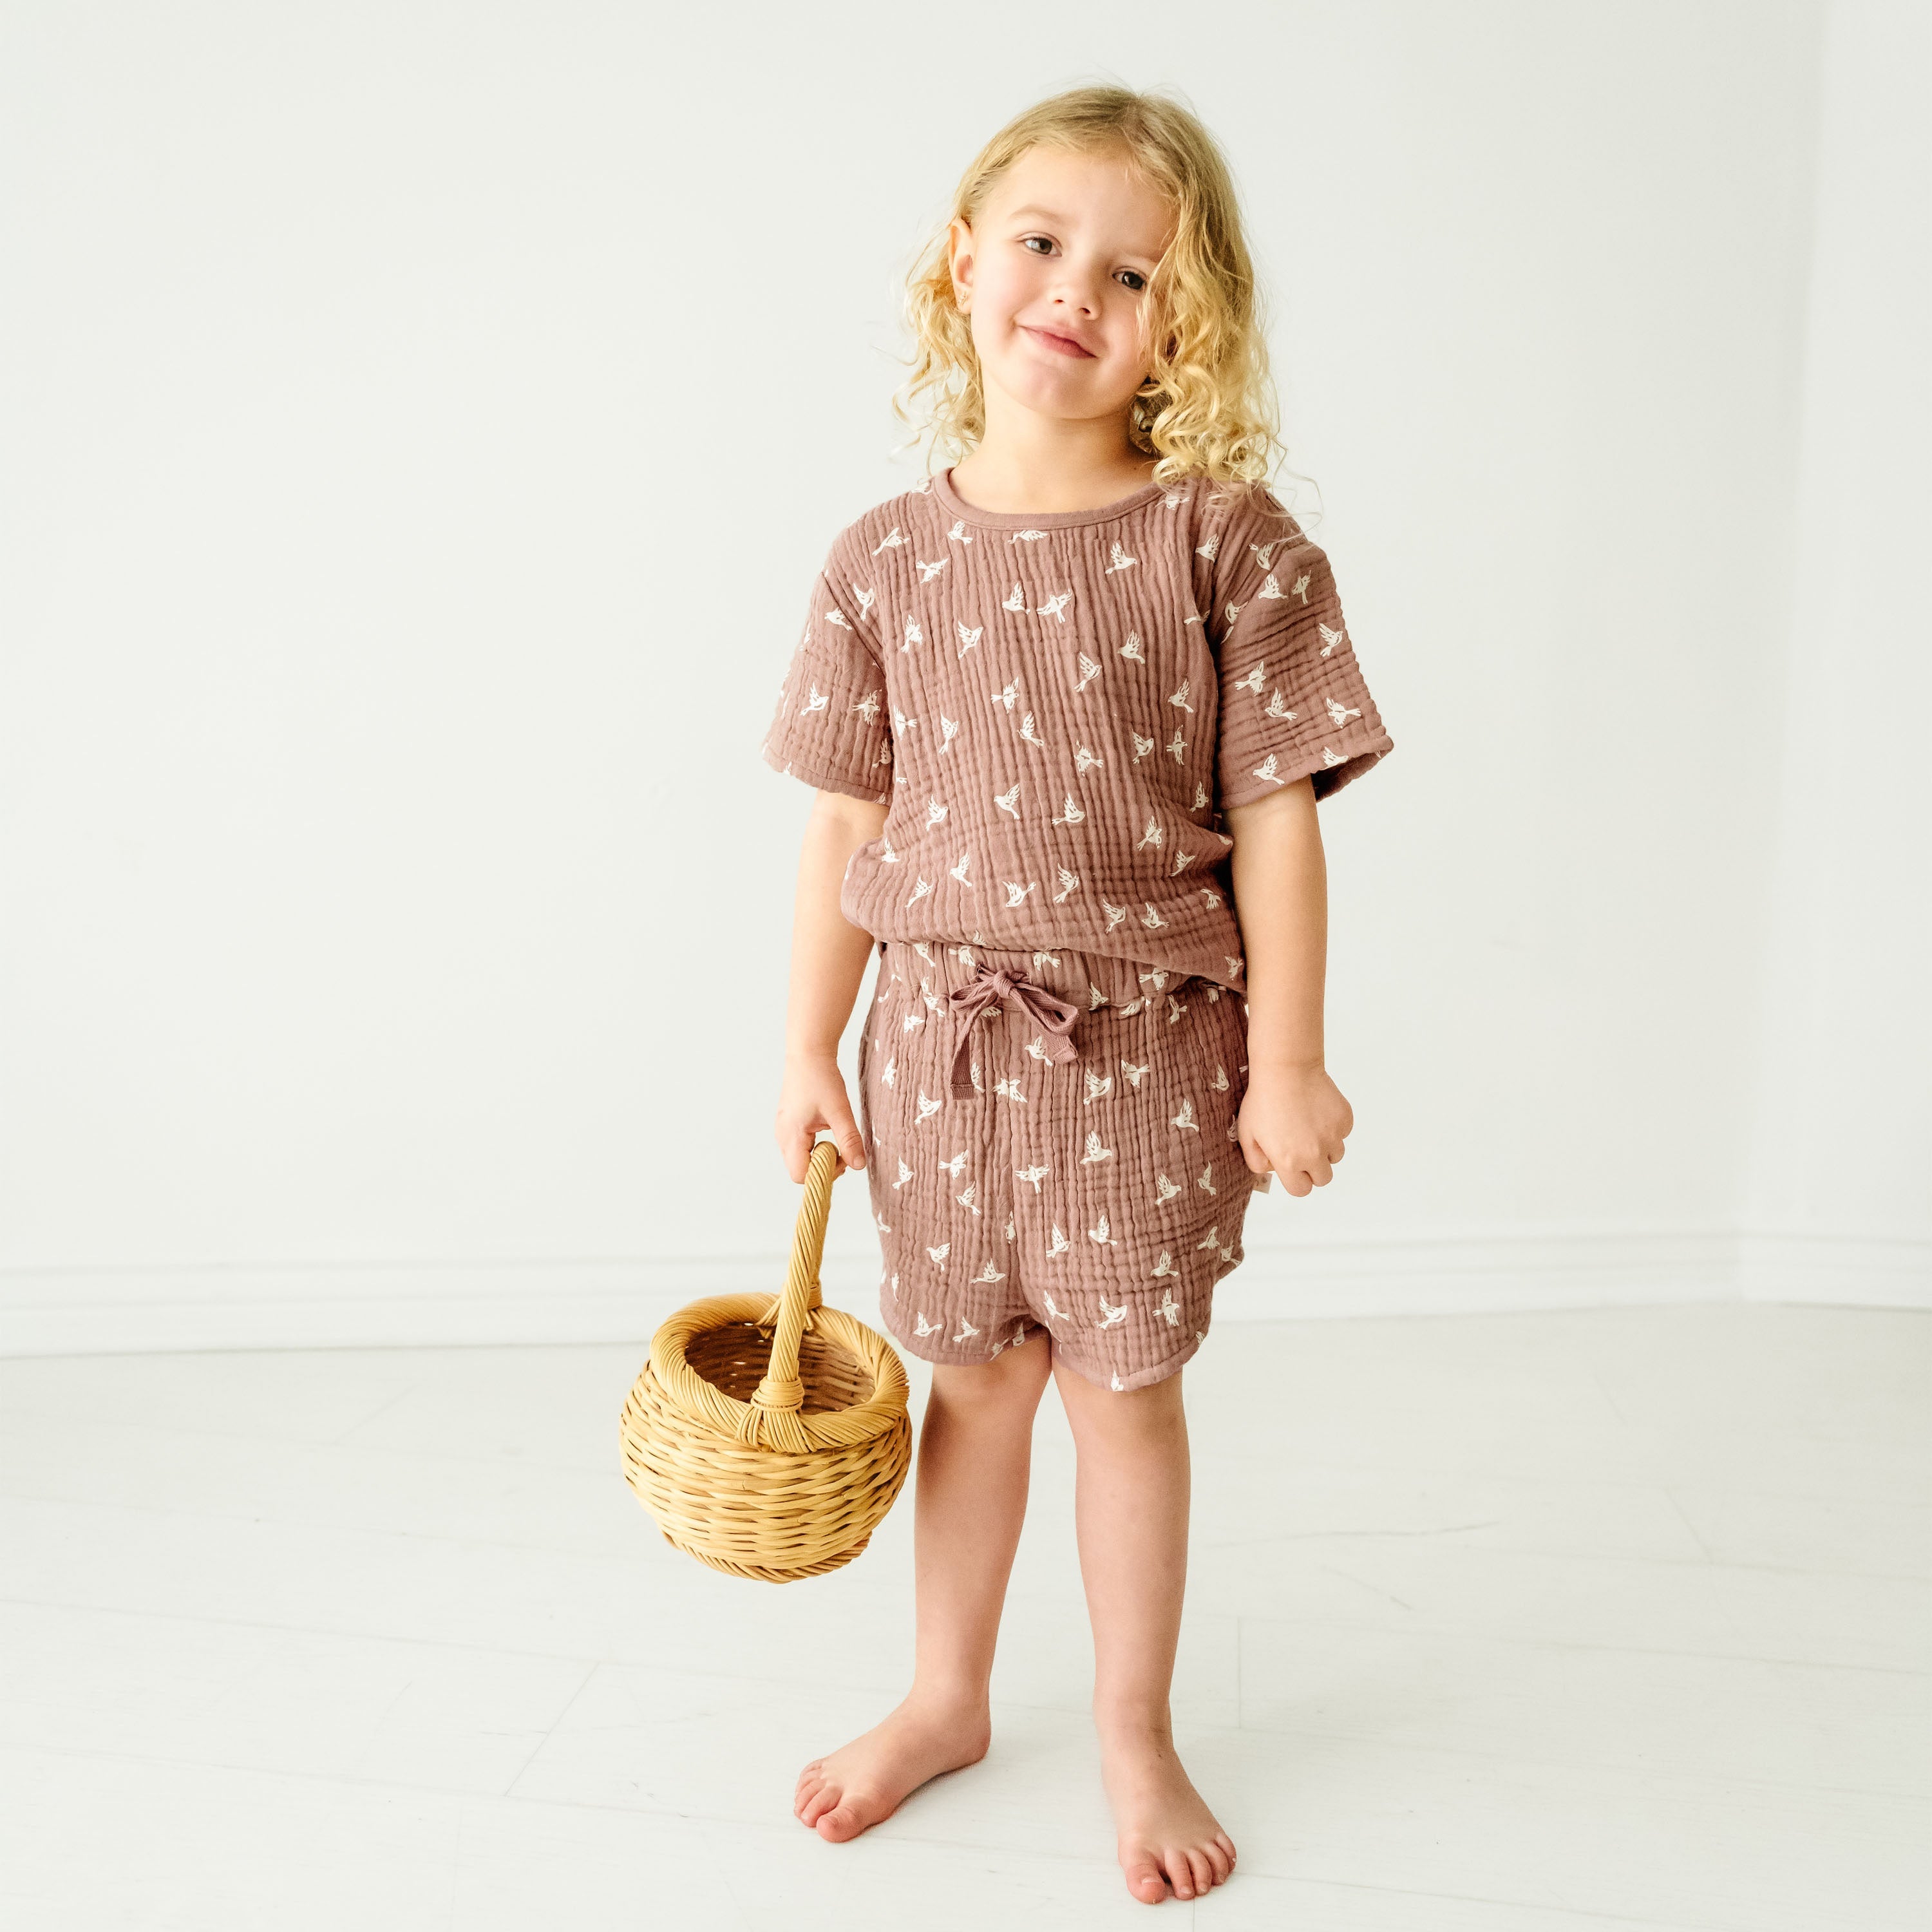 A young toddler with curly blonde hair, wearing a brown patterned outfit, stands smiling in a white room while holding a small wicker basket of Makemake Organics' Organic Muslin Top and Shorts 2 Piece Set - Flock.